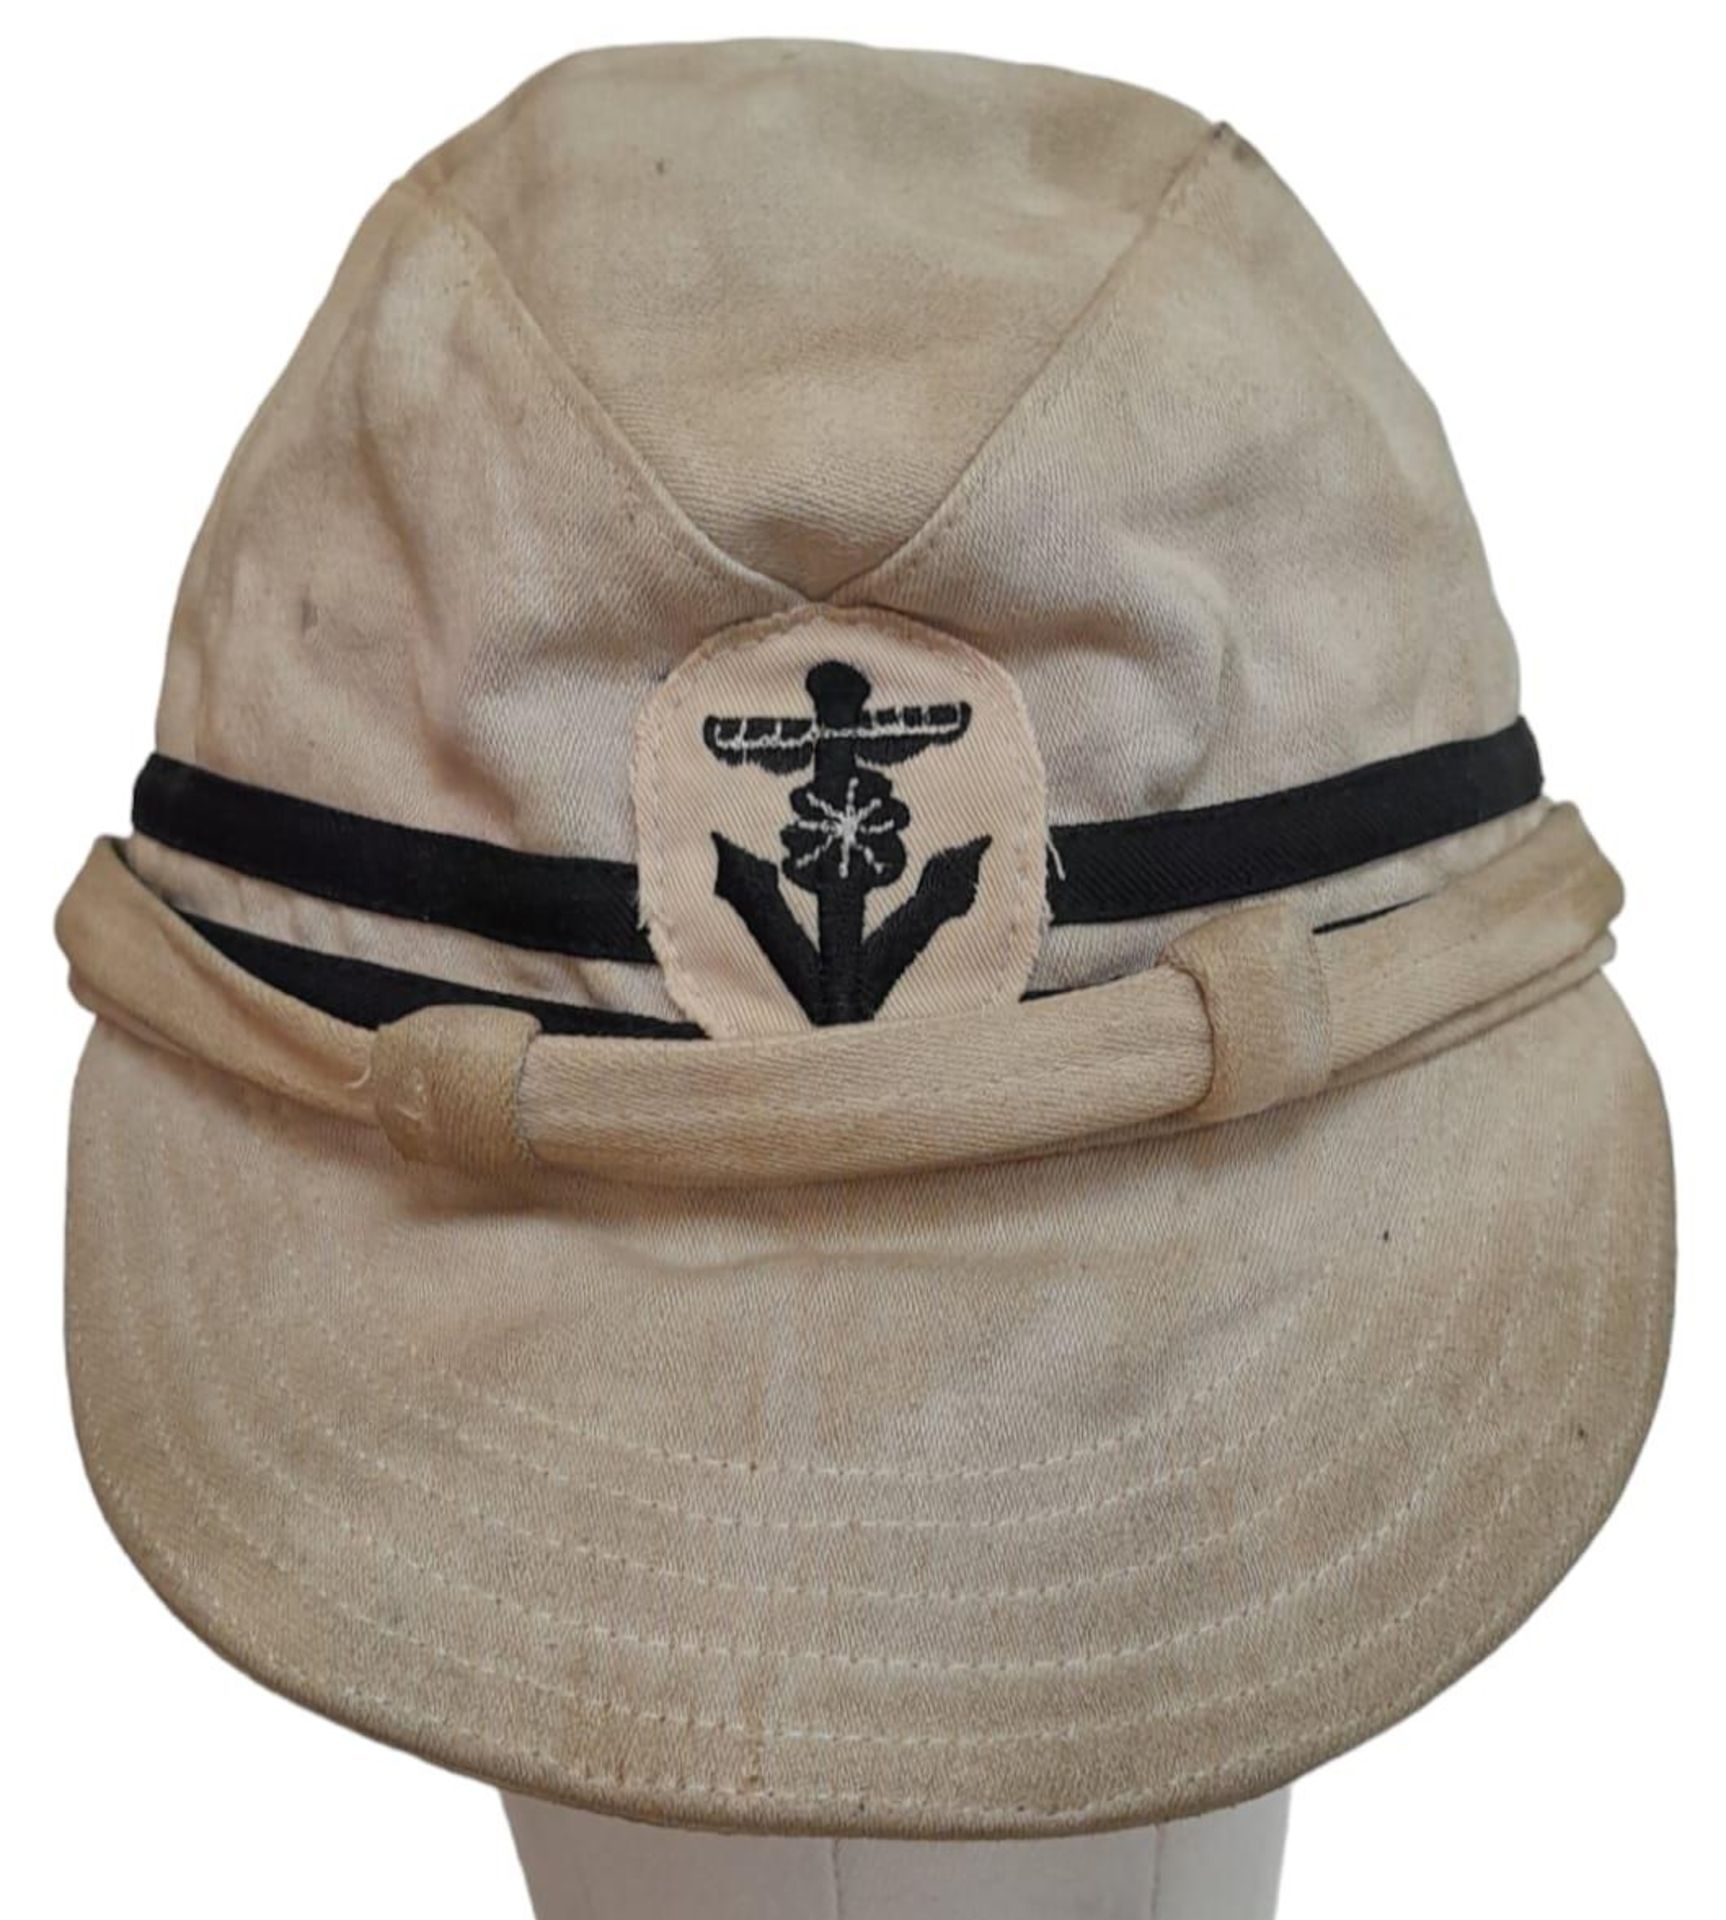 WW2 Japanese Naval Officers Tropical Shore Cap.